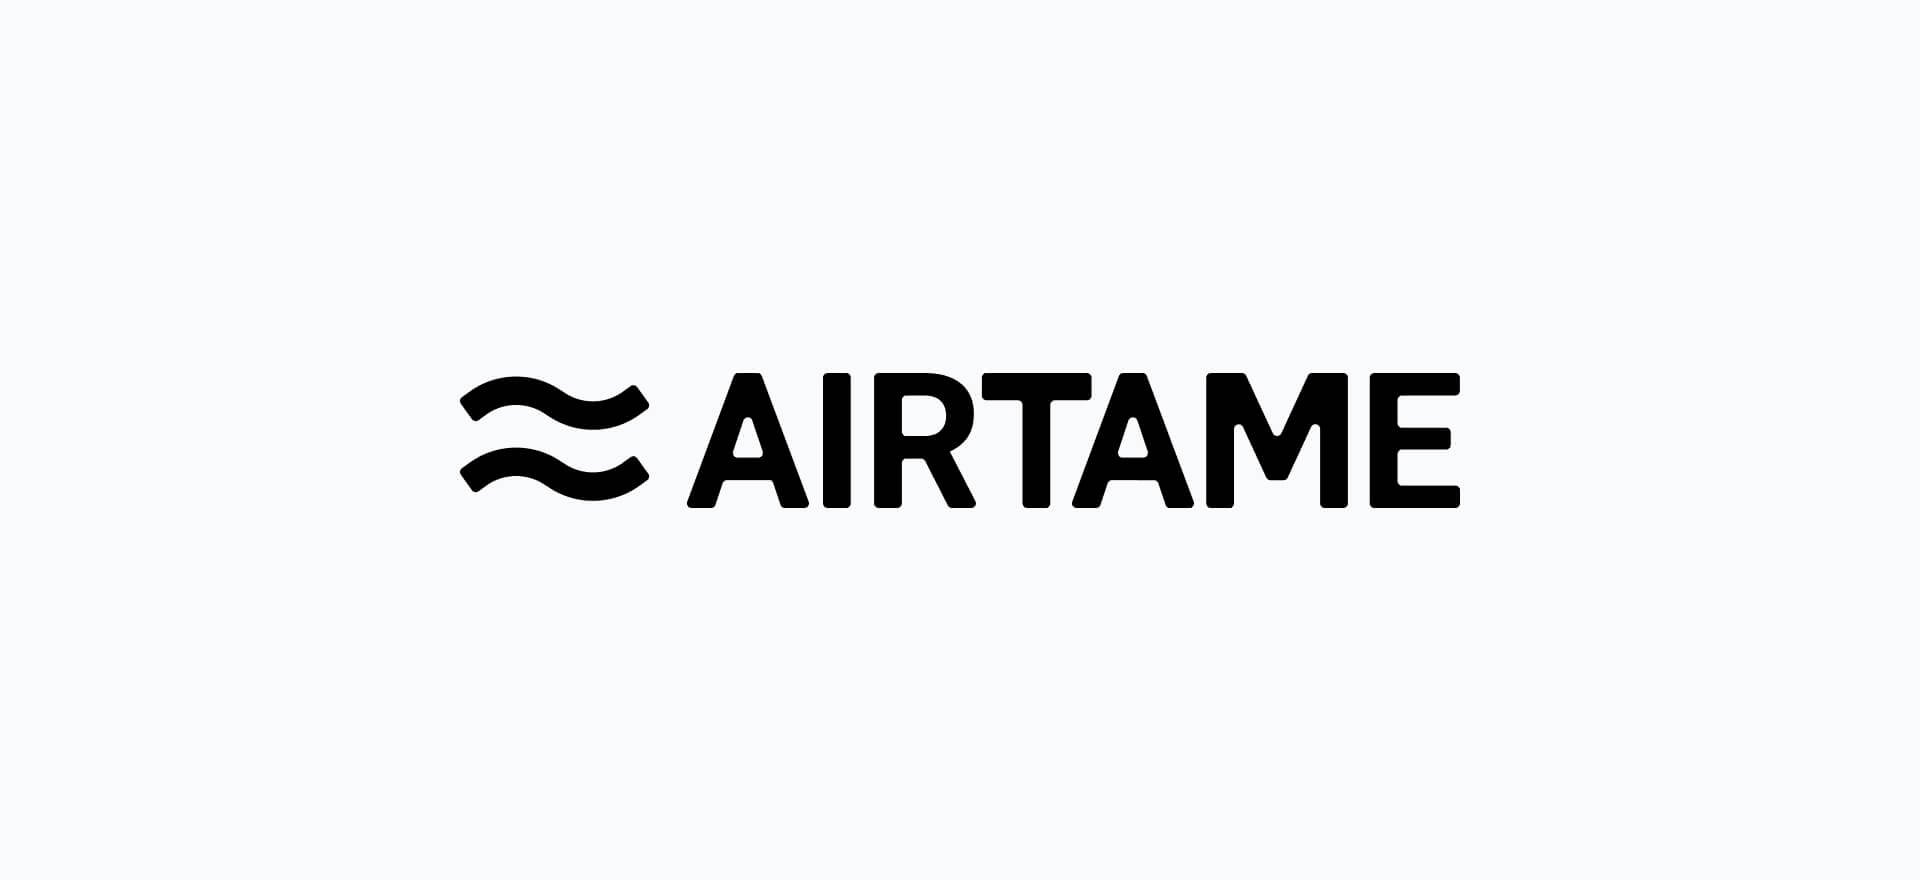 Airtame Expands Partnership with TD SYNNEX to Broaden Market Reach Throughout North America